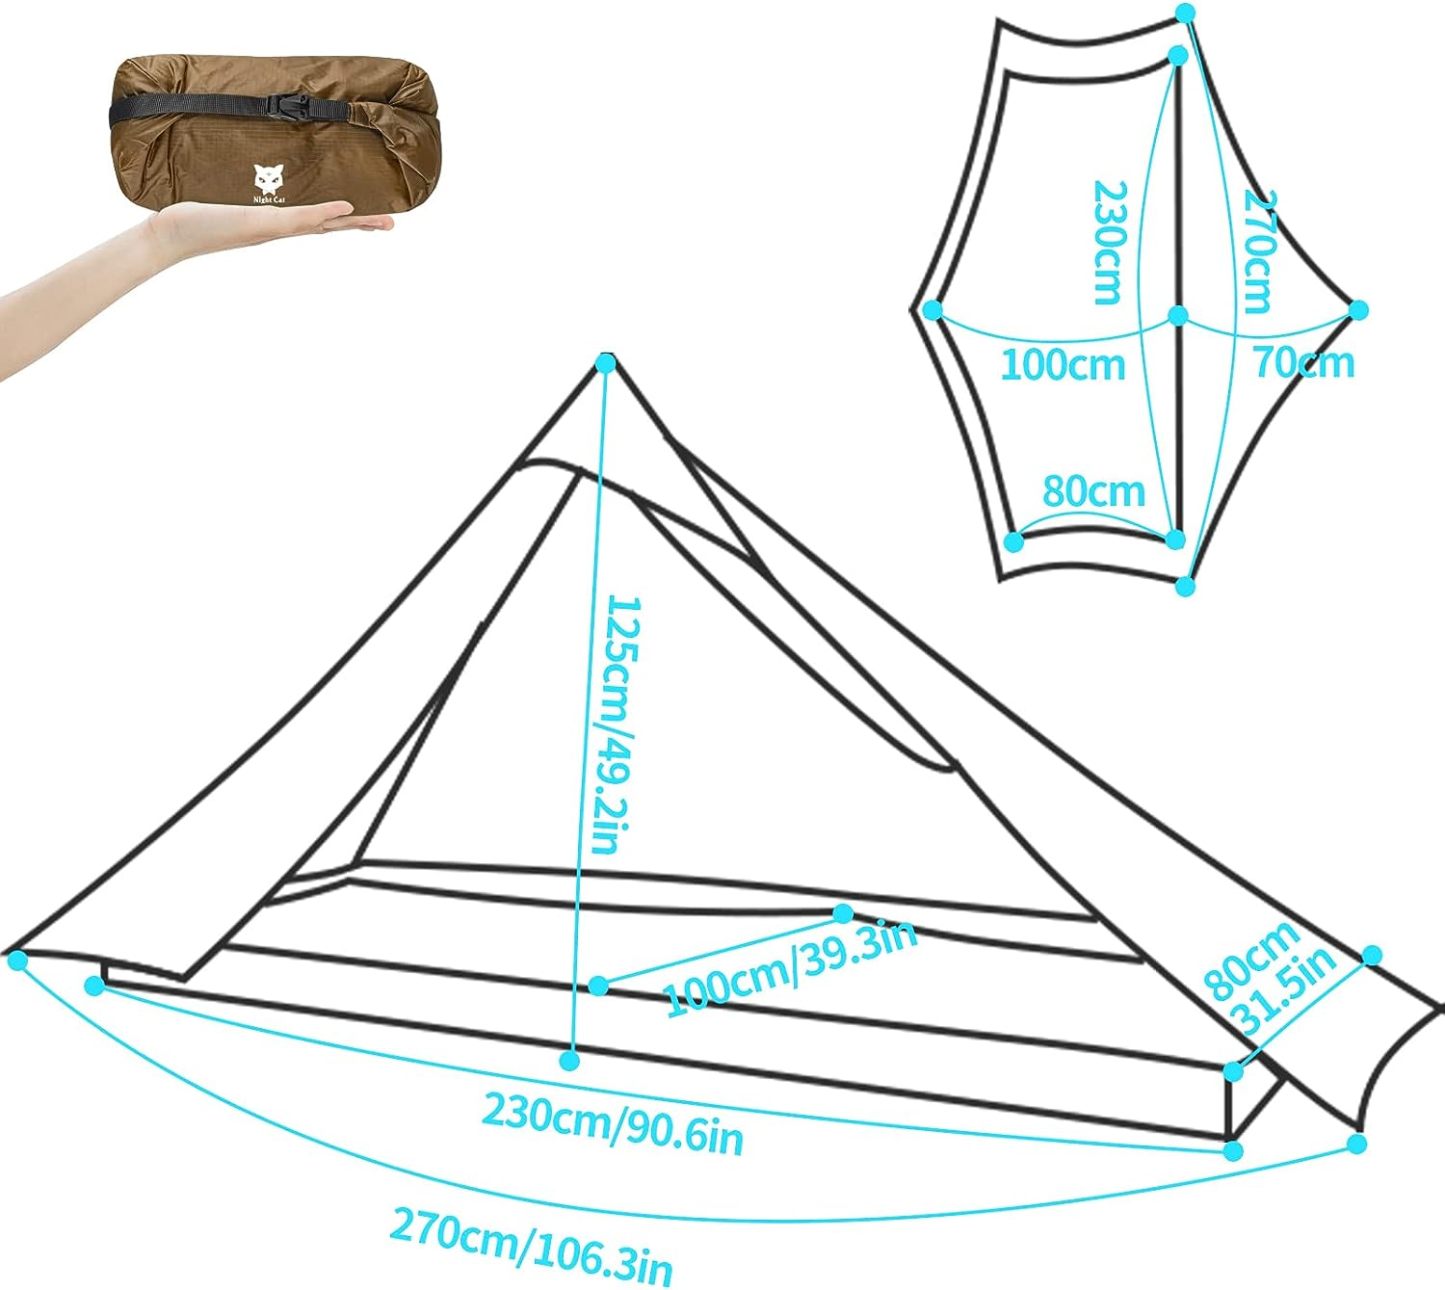 Night Cat Ultralight Tent 1 Person for Professional Backpacker Hiker